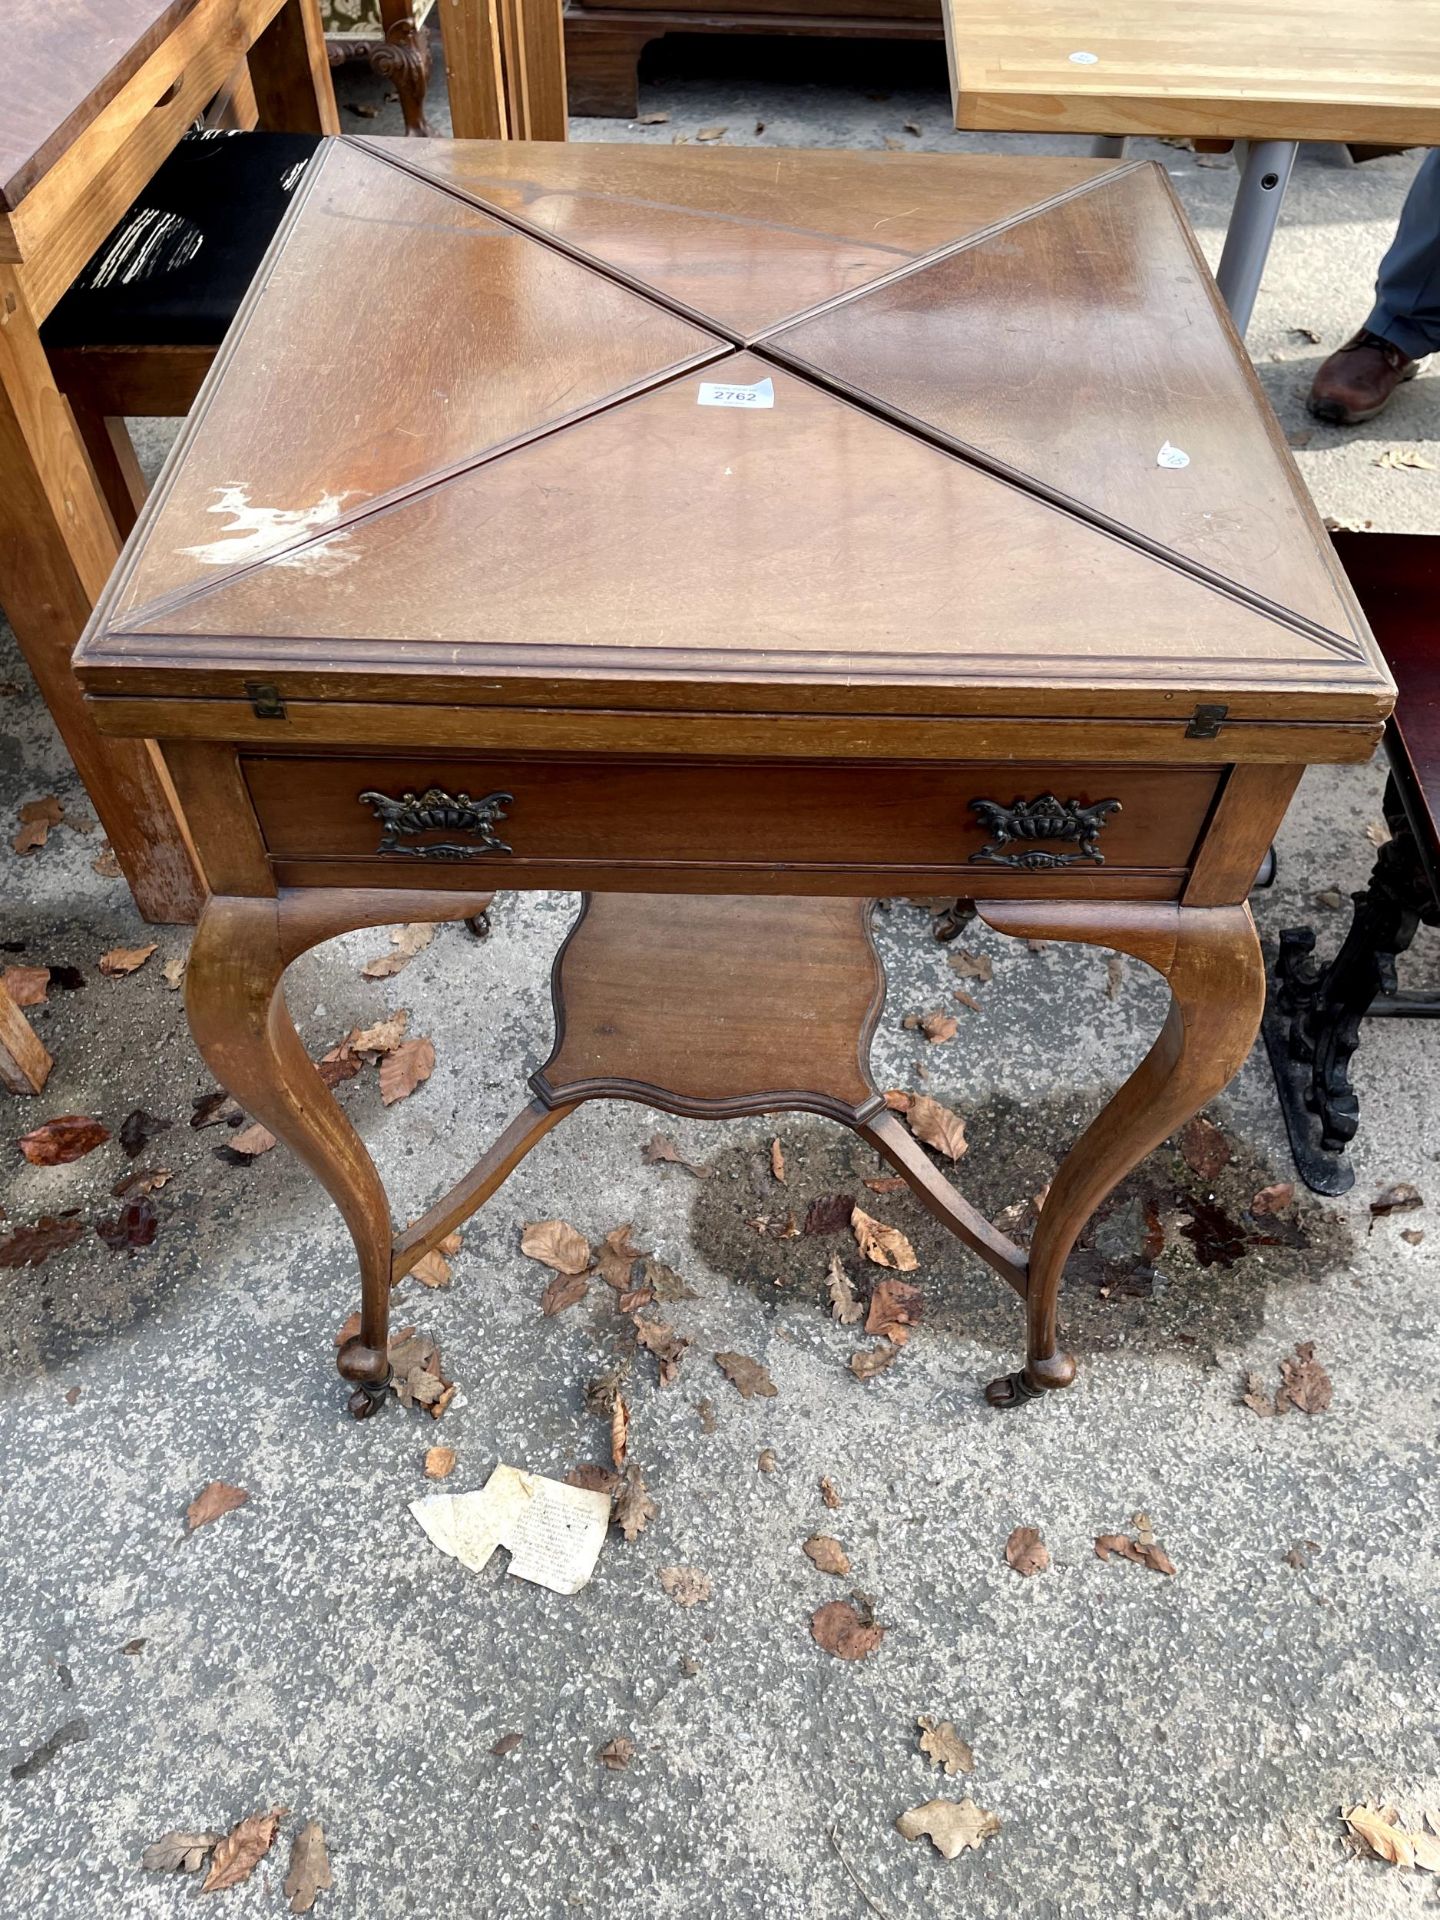 A LATE VICTORIAN MAHOGANY ENVELOPE CARD TABLE WITH SINGLE DRAWER AND UNDER SHELF - Image 2 of 5